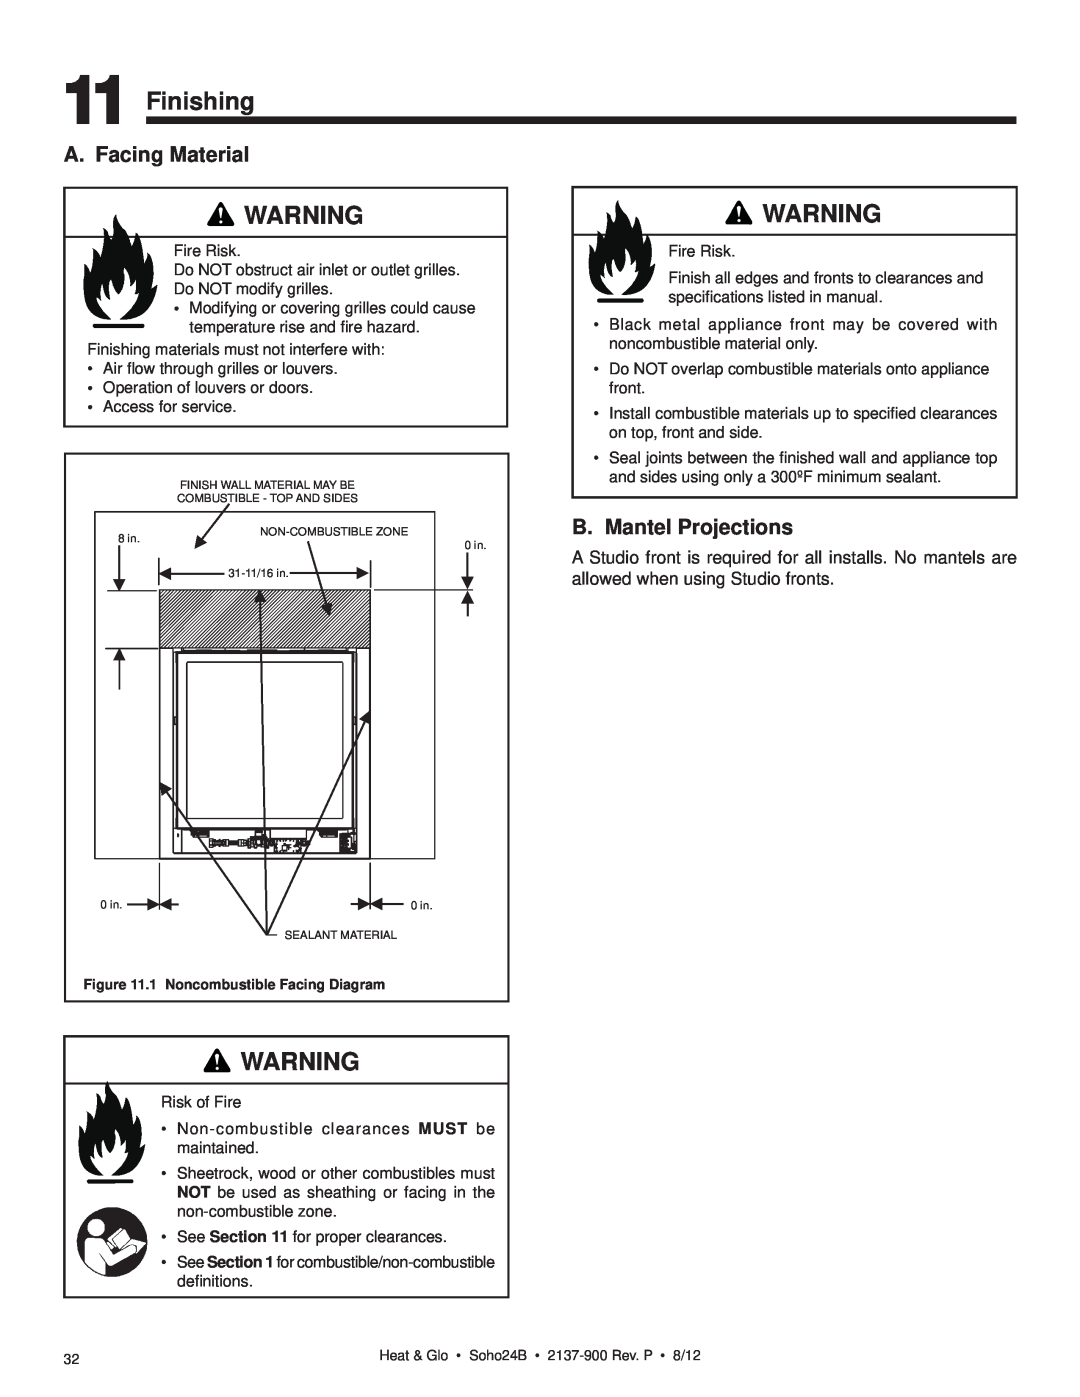 Heat & Glo LifeStyle 2137-900 owner manual Finishing, A. Facing Material, B.Mantel Projections 